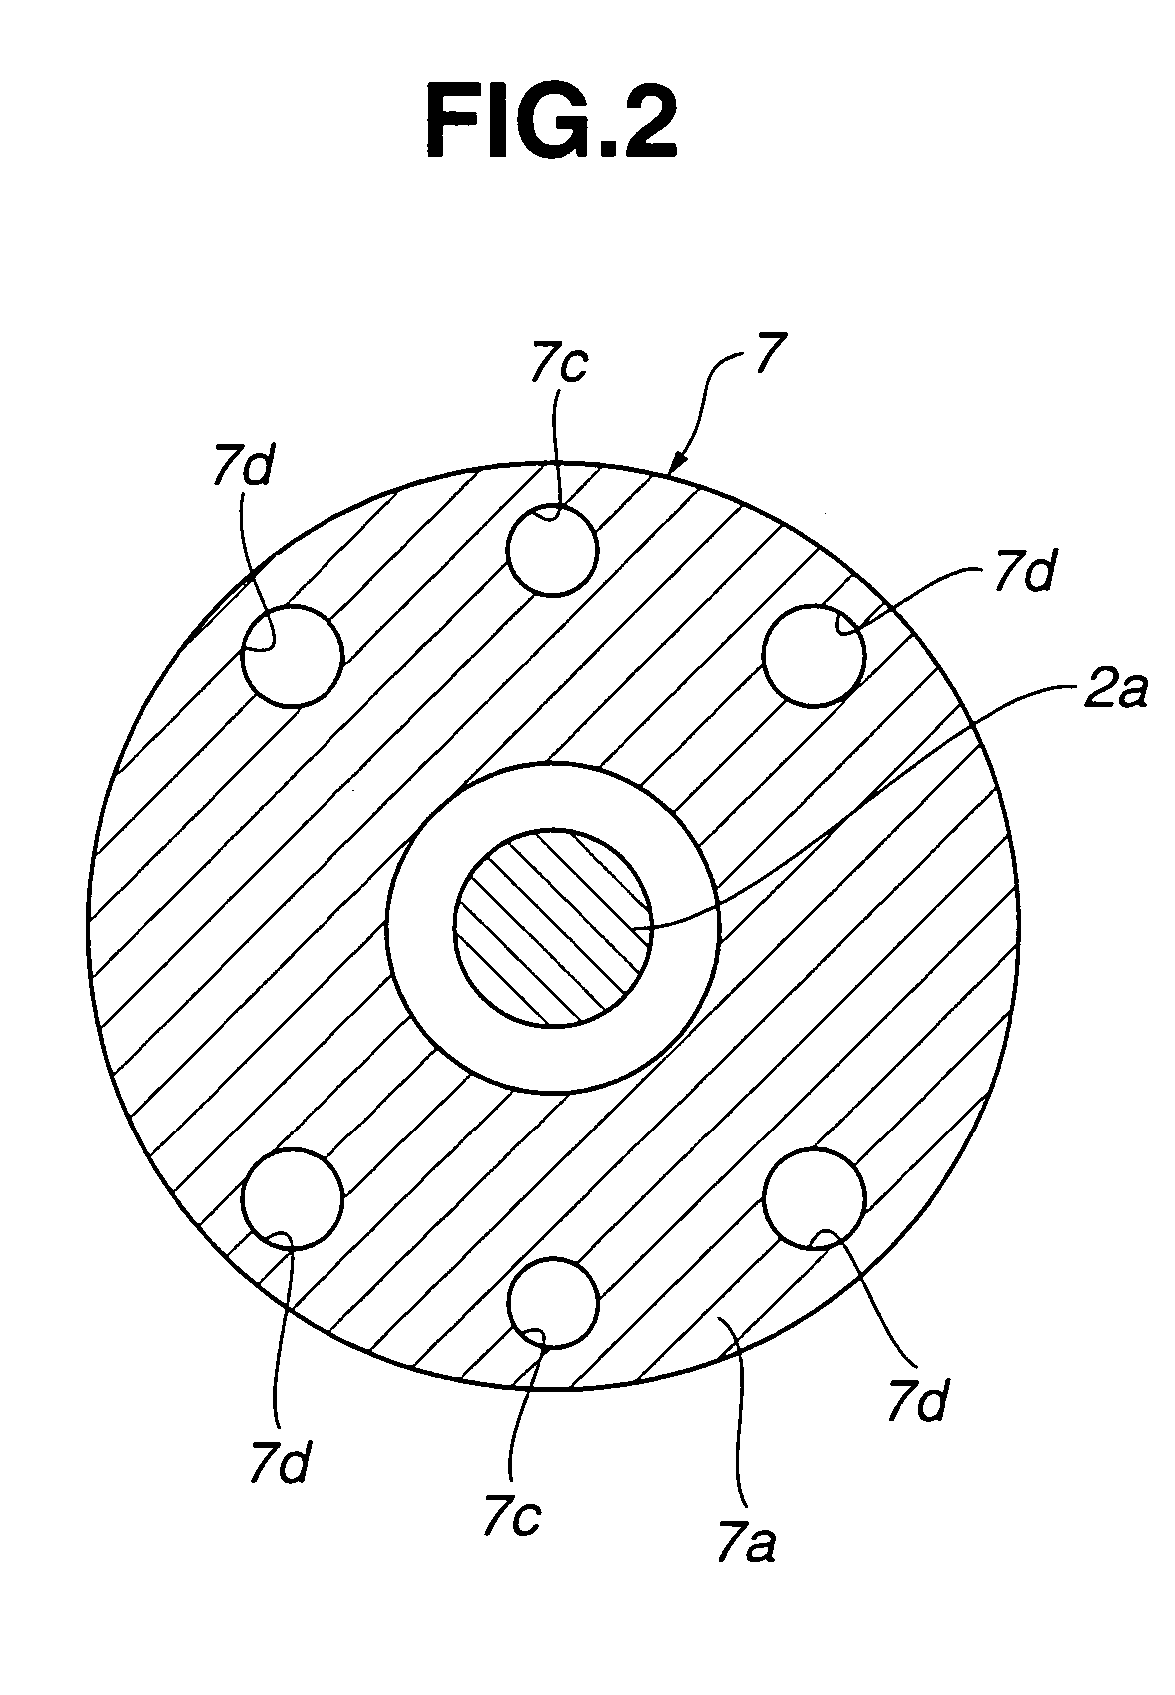 Installation structure for electric rotating machine in motor vehicle